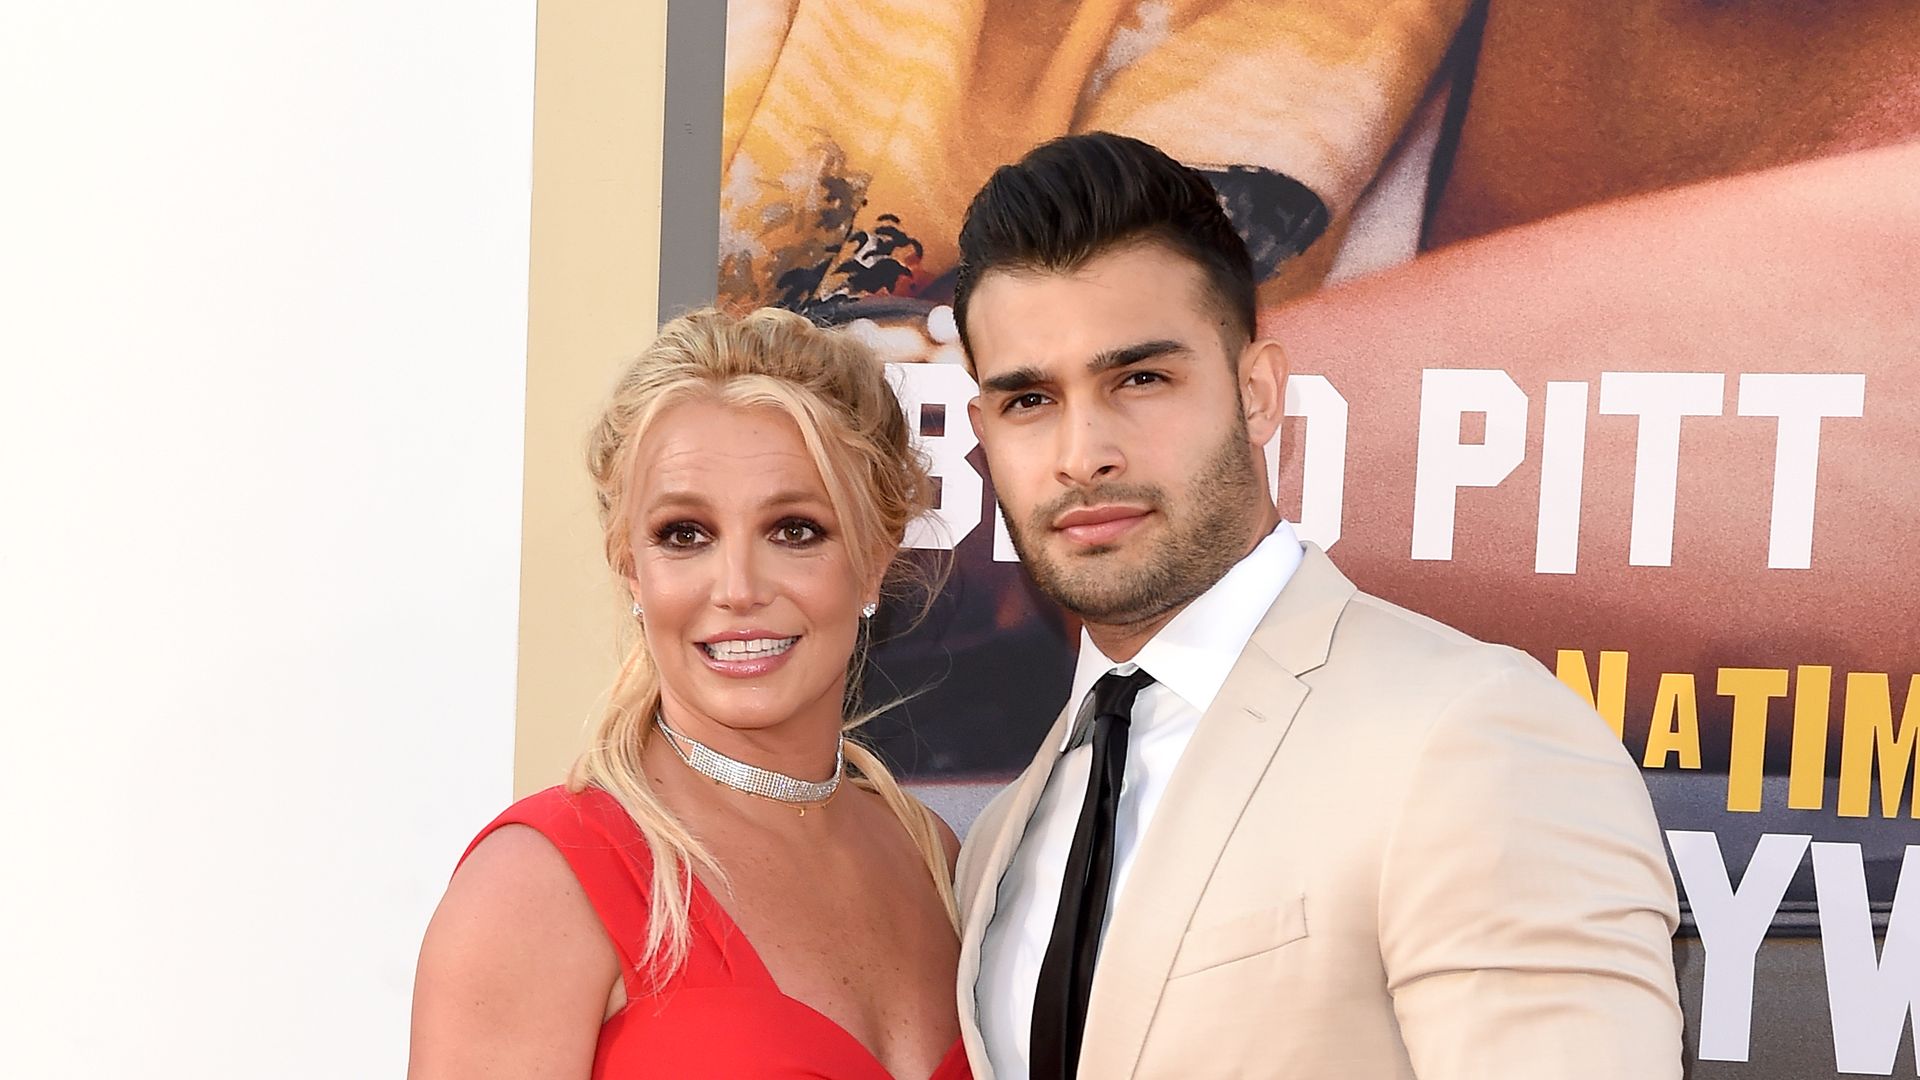 Britney Spears and Sam Asghari attend Sony Pictures' "Once Upon a Time ... in Hollywood" Los Angeles Premiere on July 22, 2019 in Hollywood, California